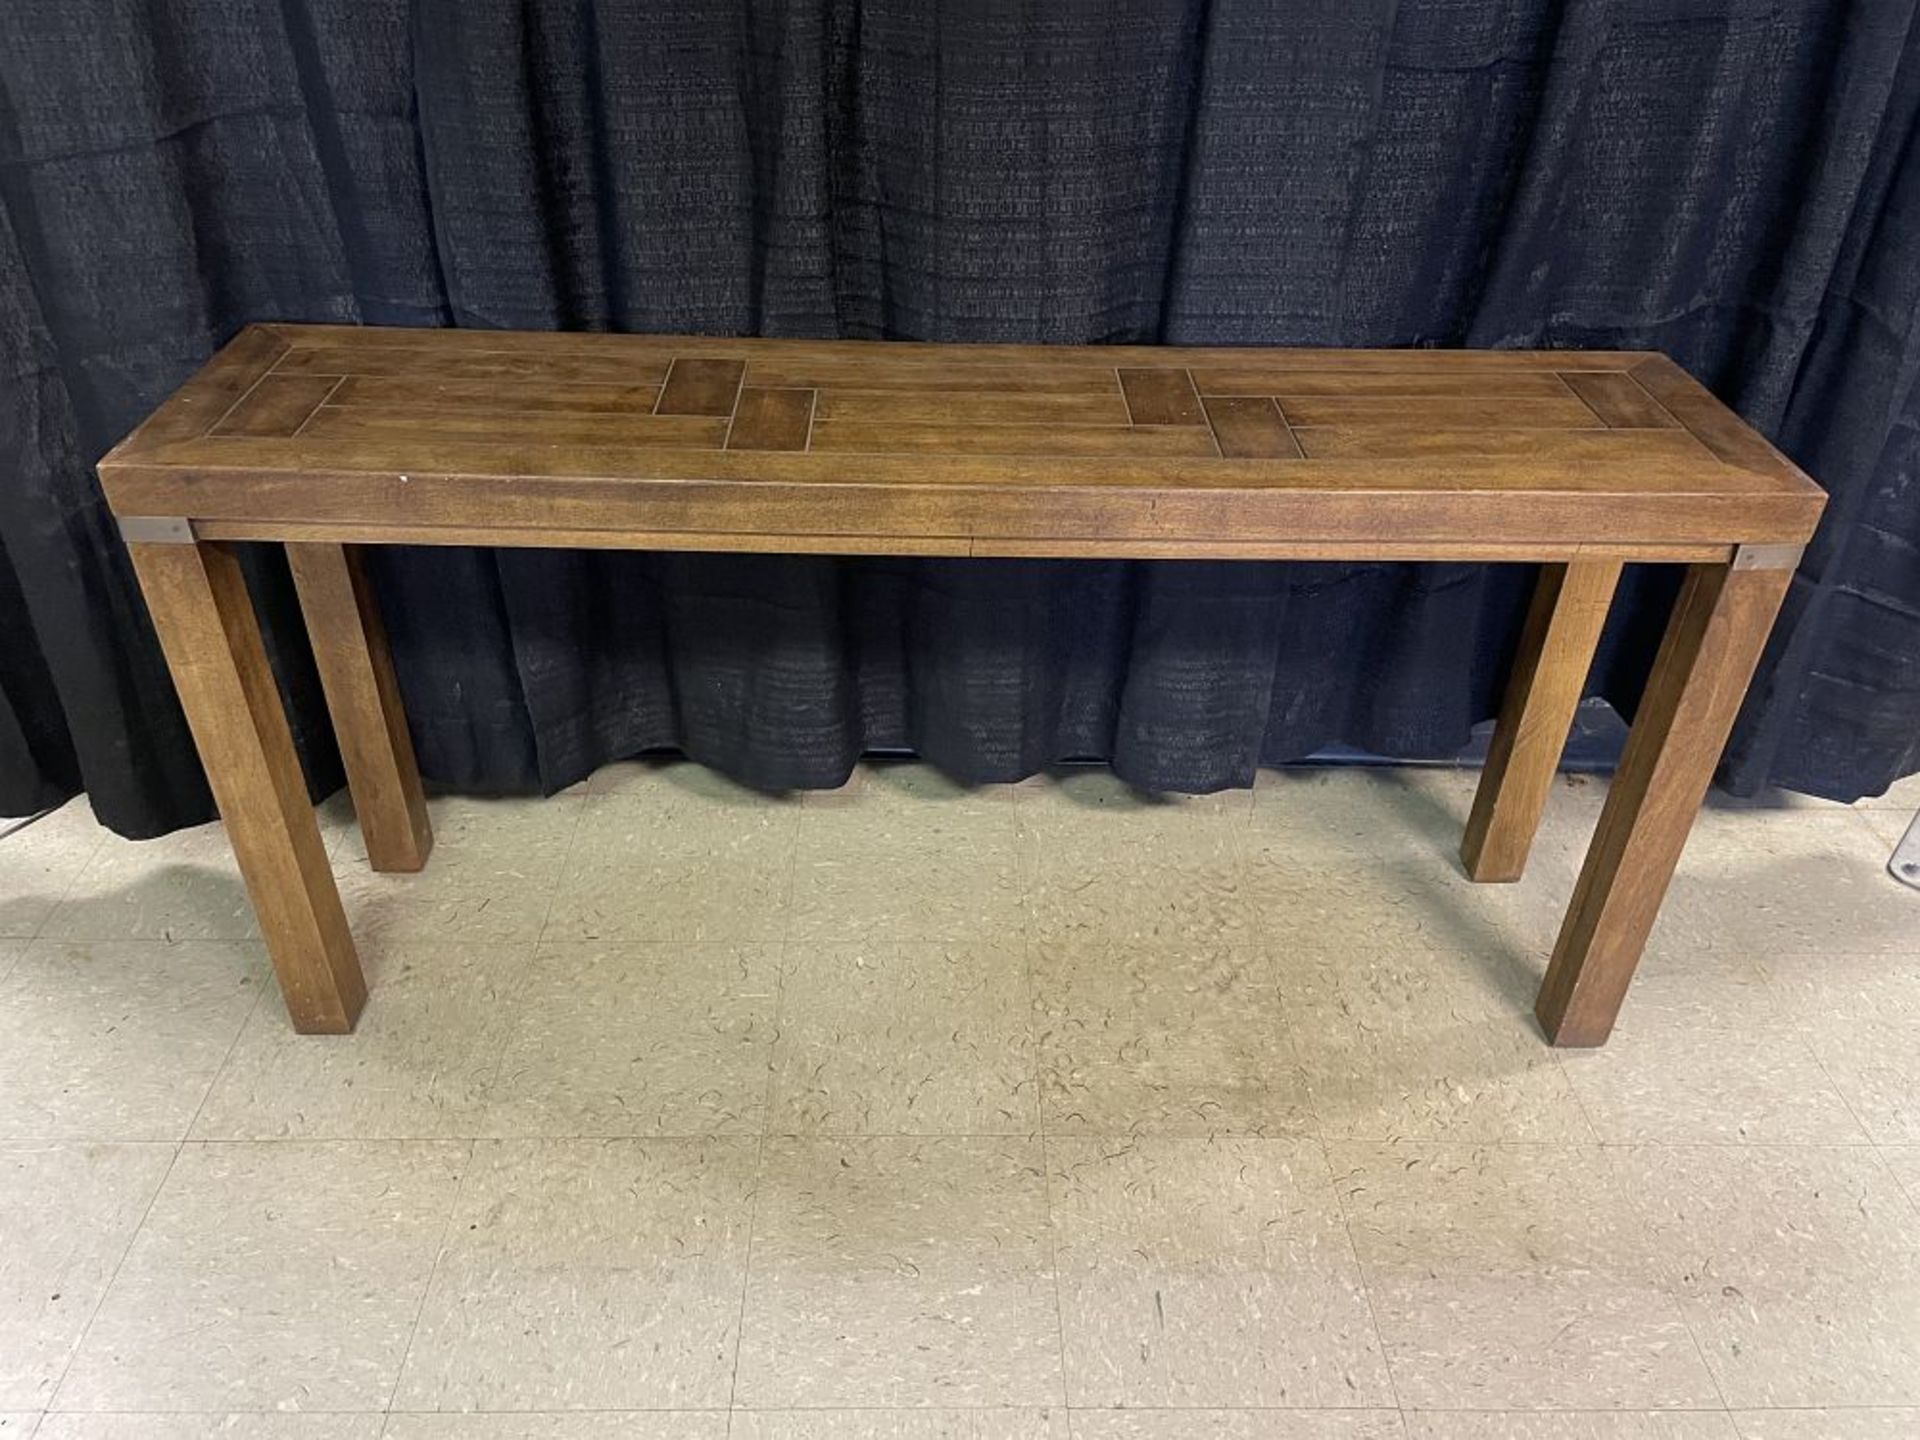 14x60 Sofa Table, wooden